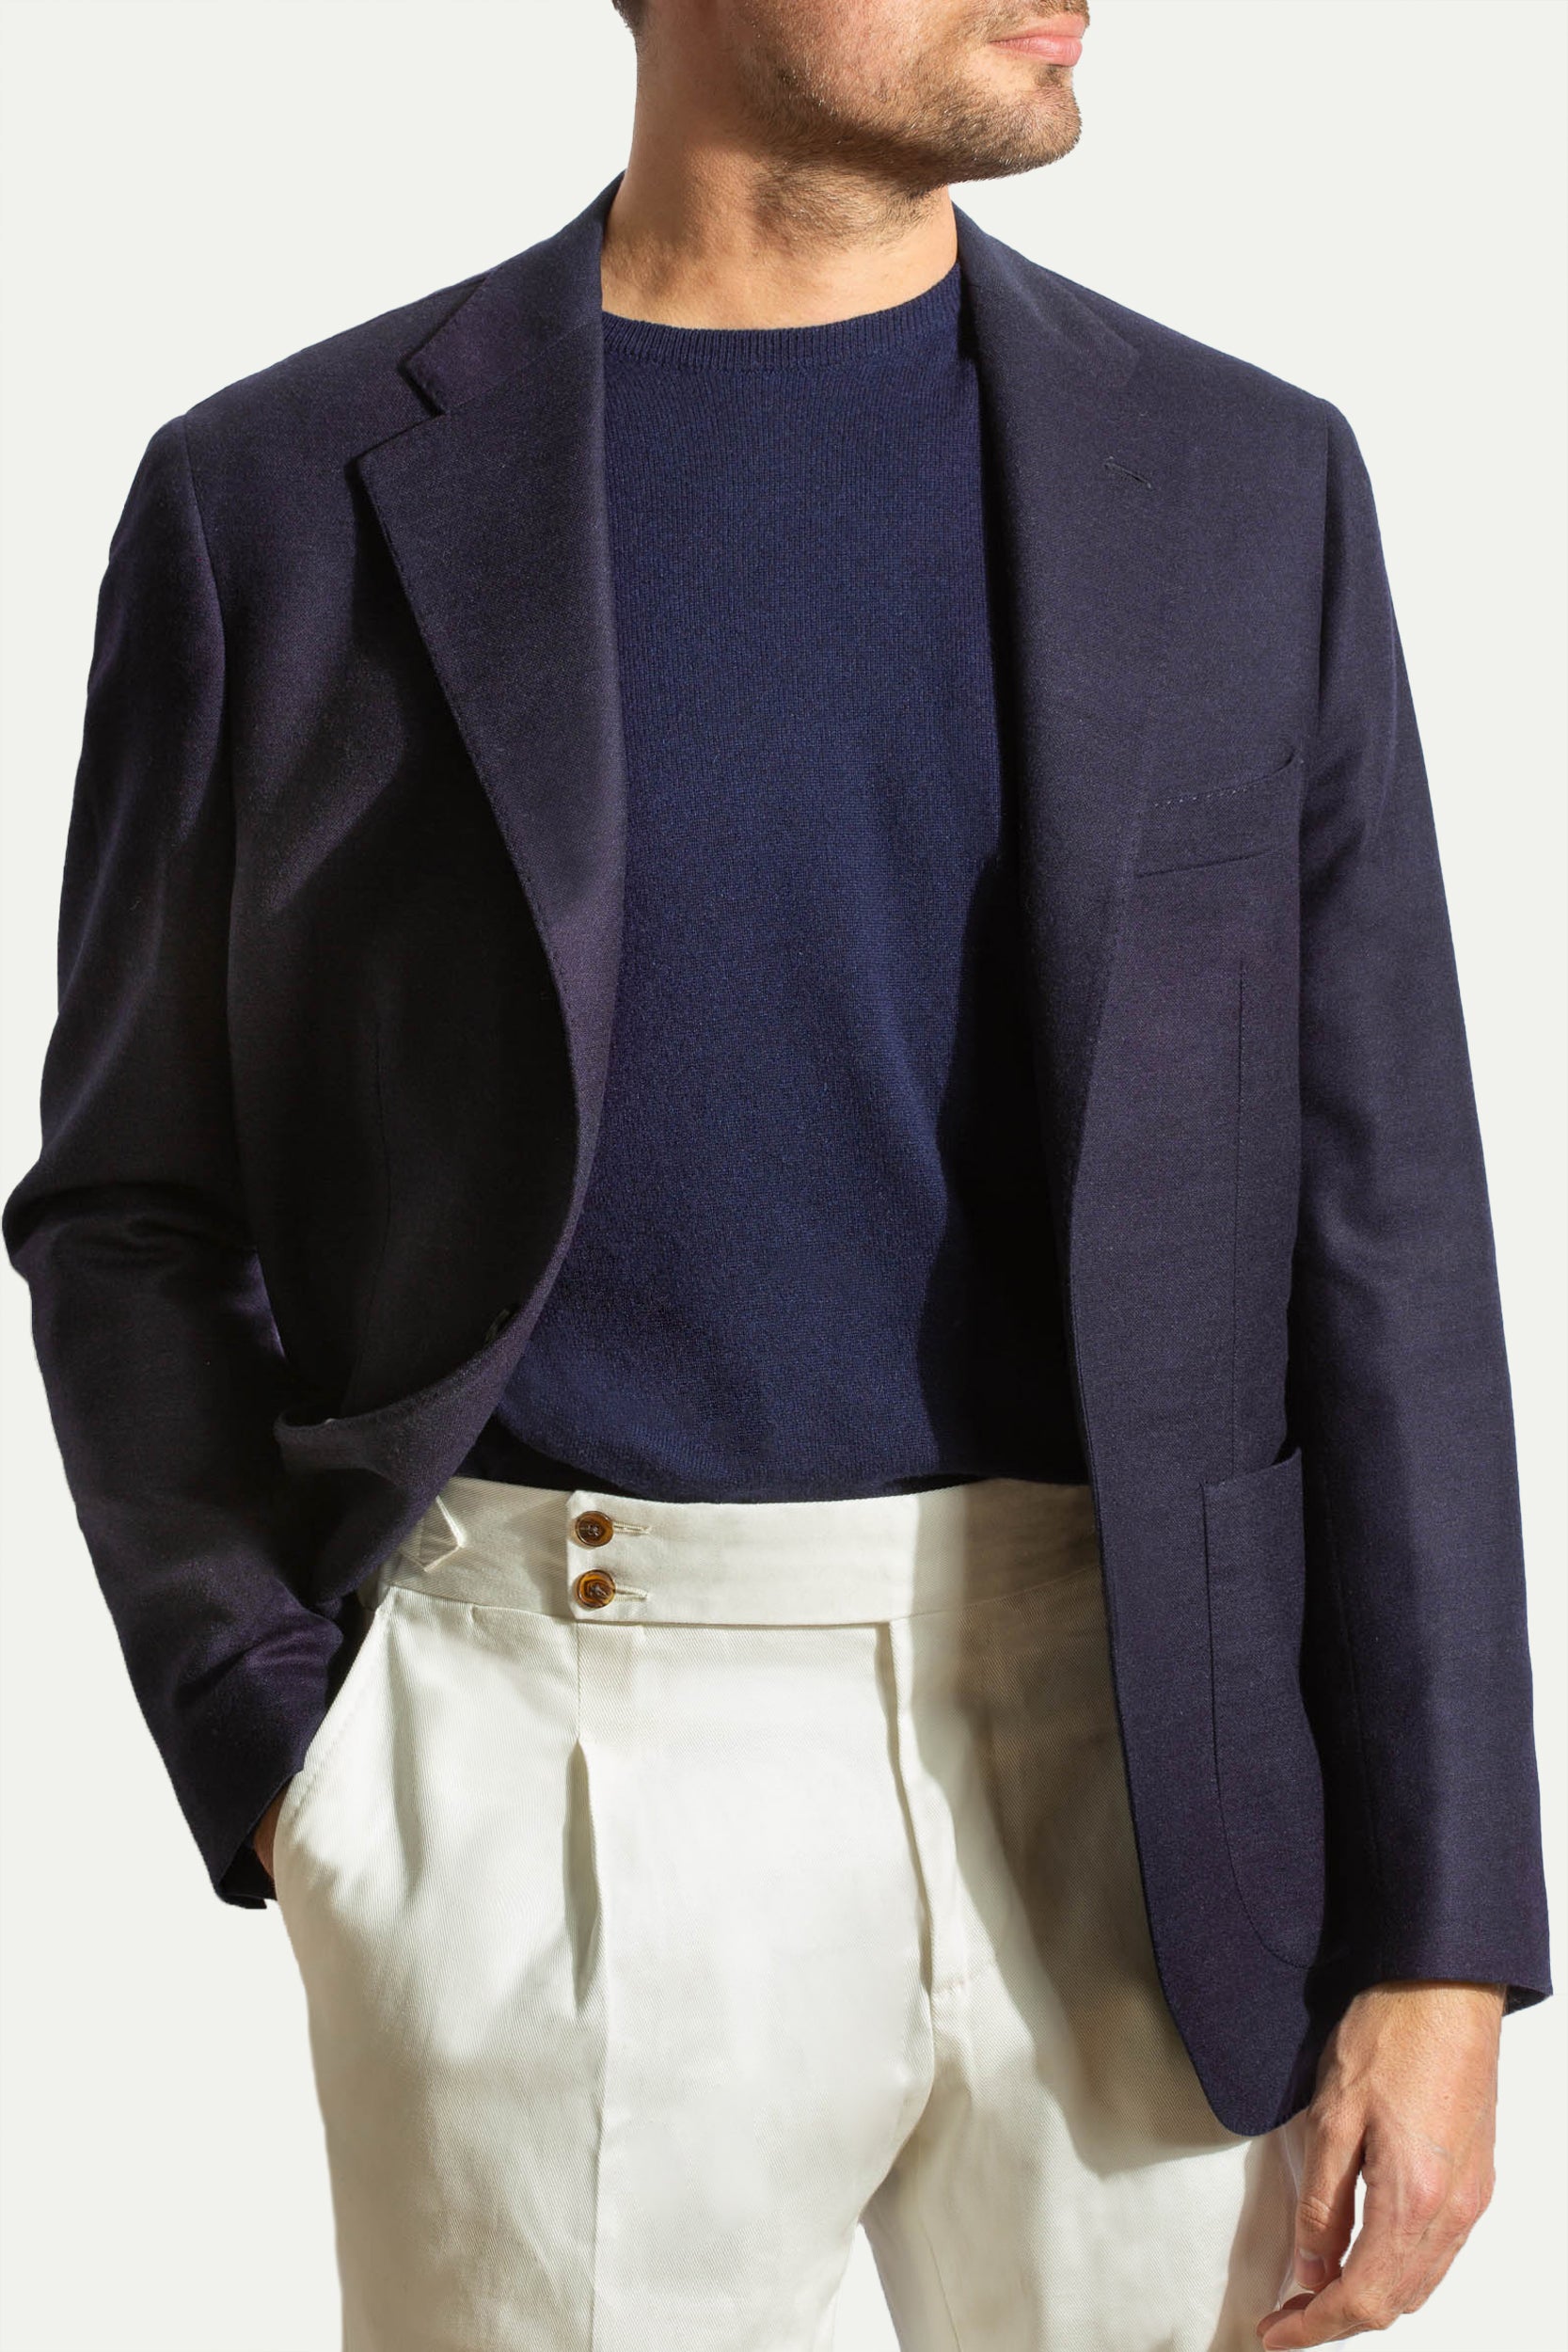 Blue jacket in Loro Piana stretch wool - Made in Italy